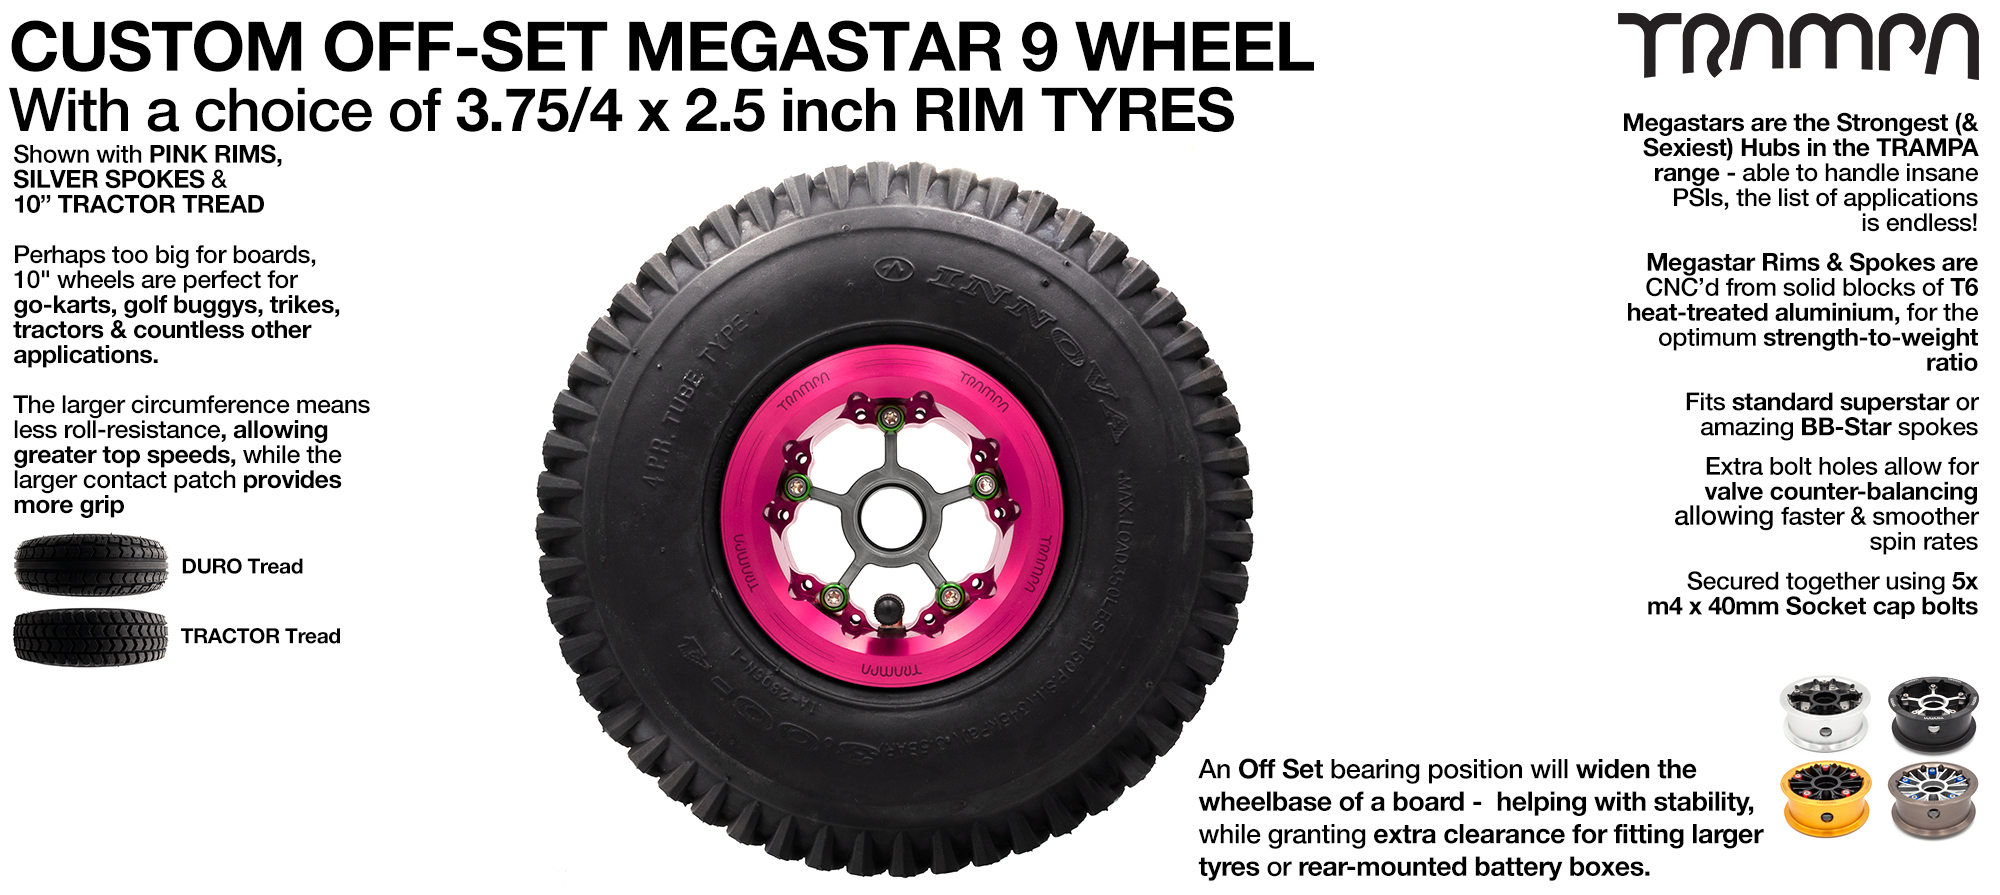 OFF-SET MEGASTAR 9 WHEEL - Fits from 6 - 10 Inch Tyres - 3.75/4 x 2.5 Inch 